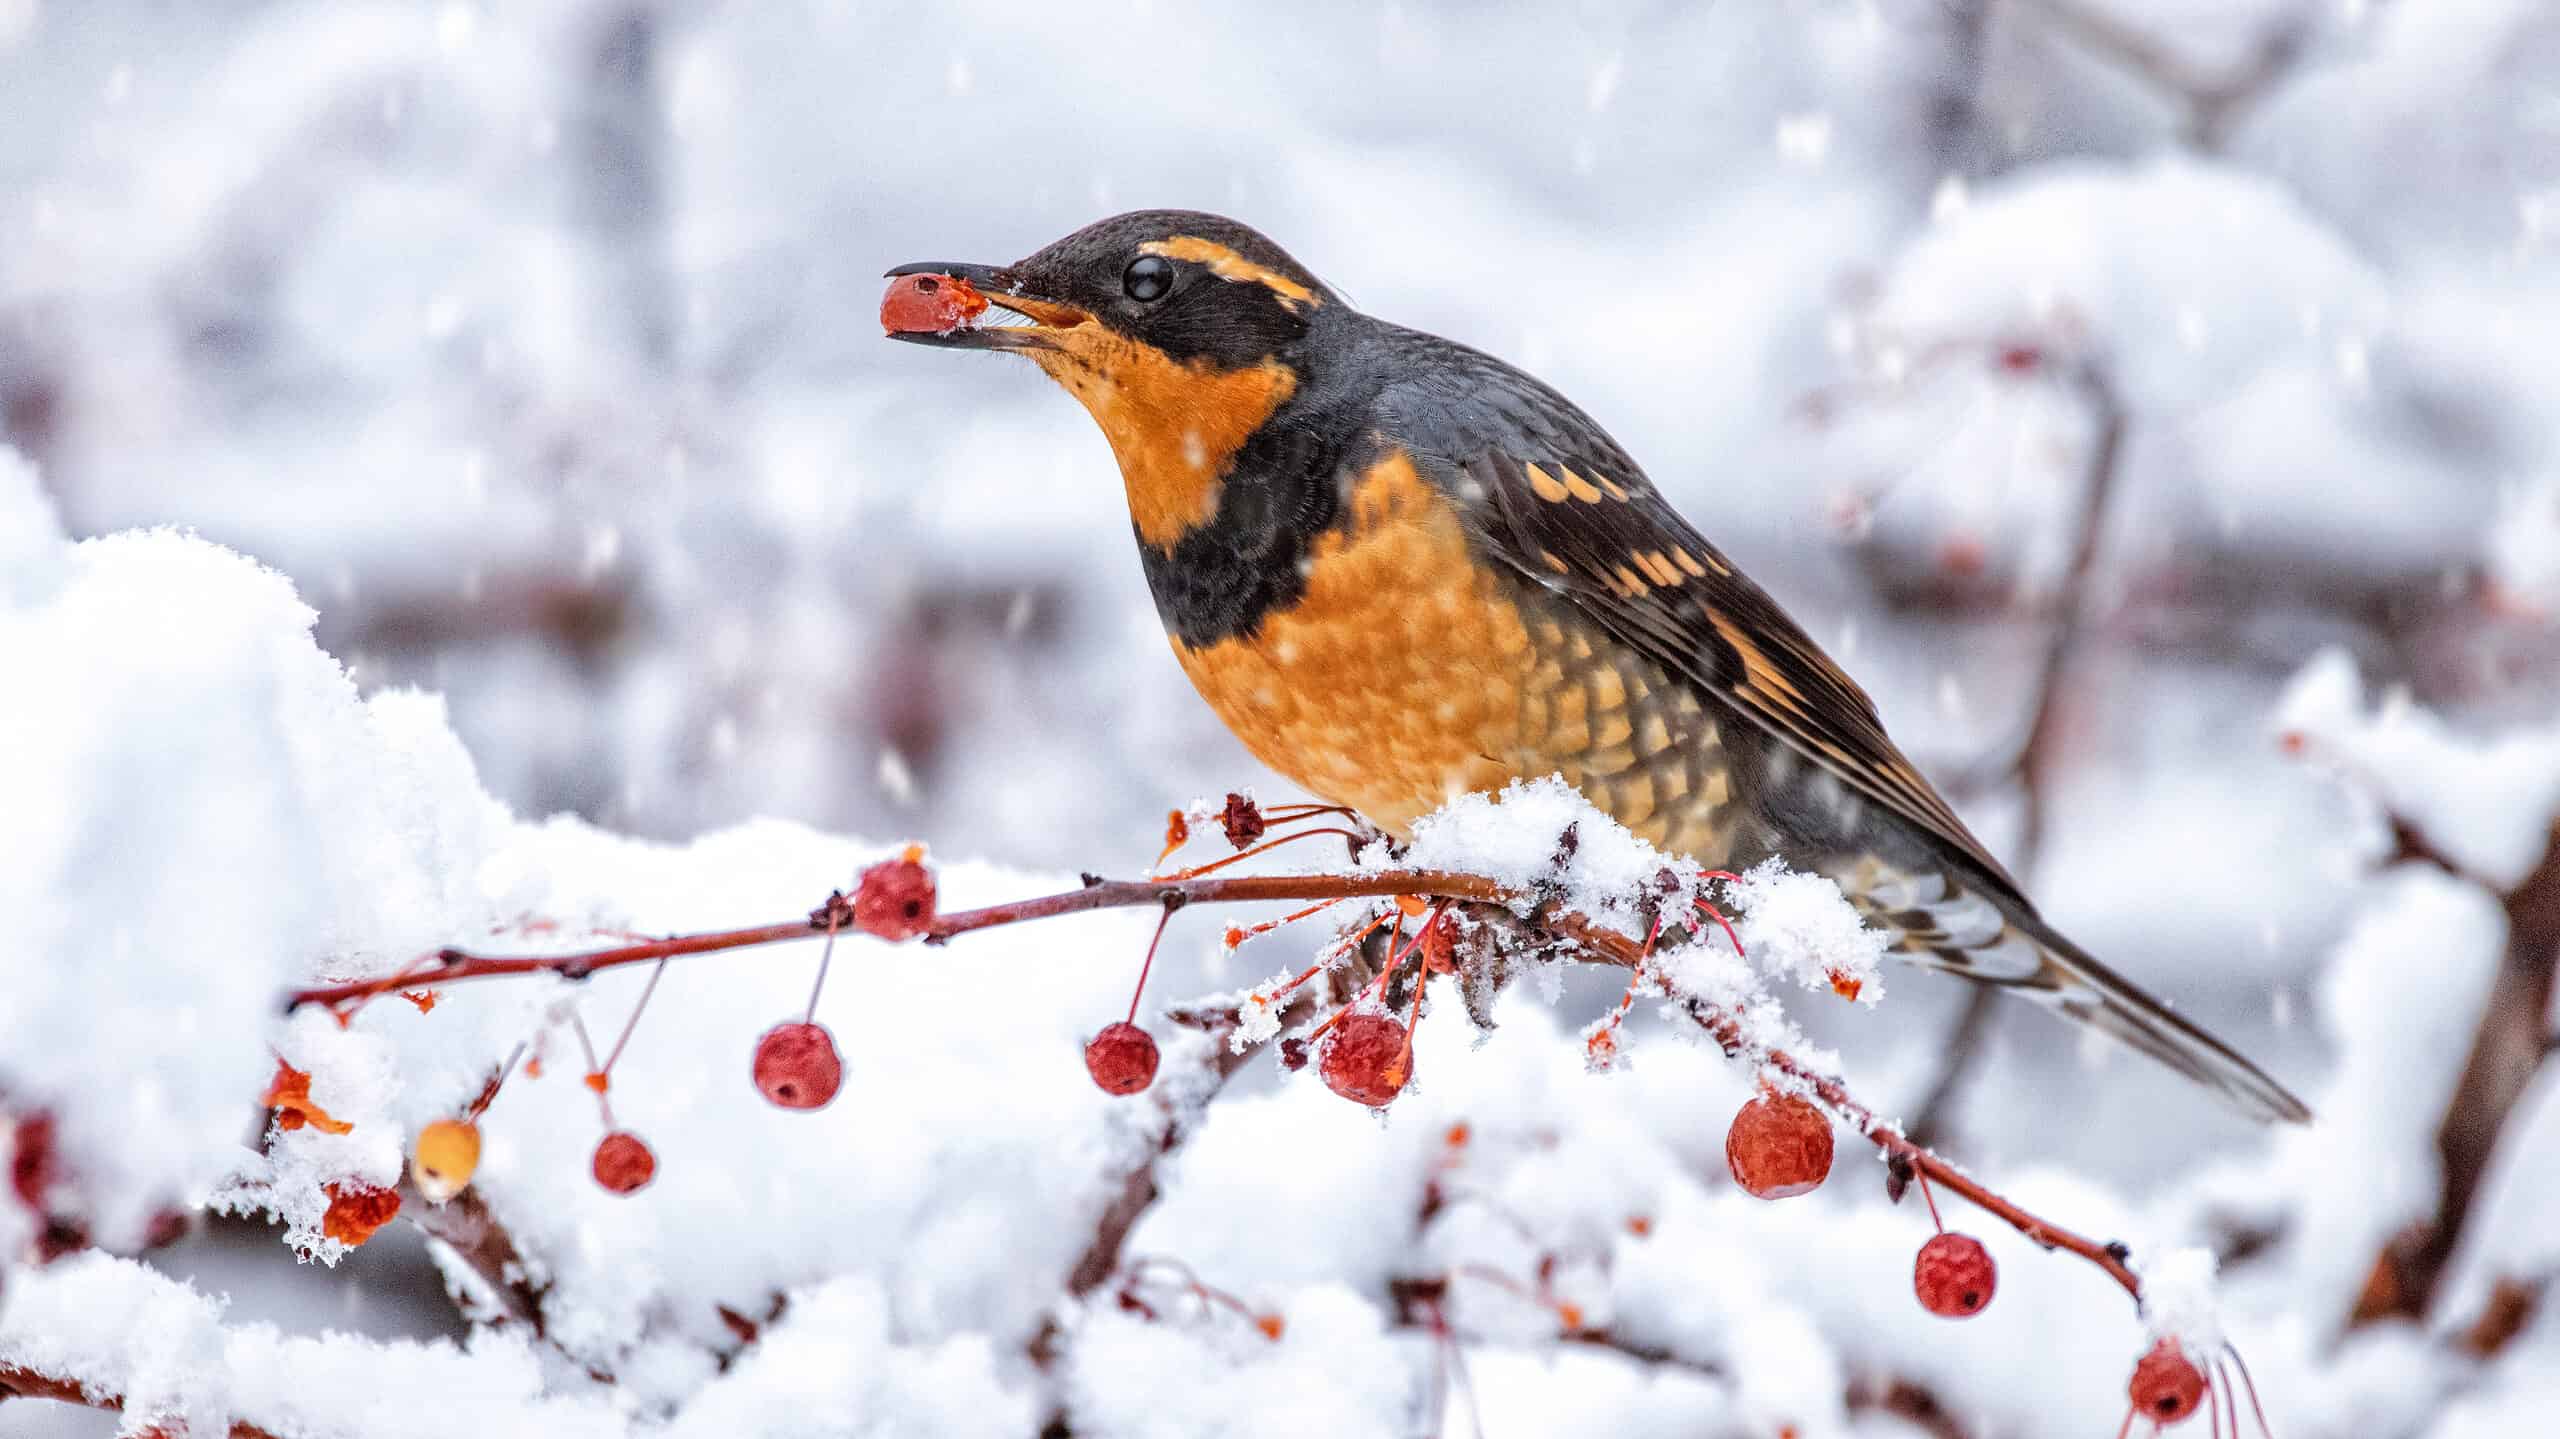 Thrush eating a berry in snow